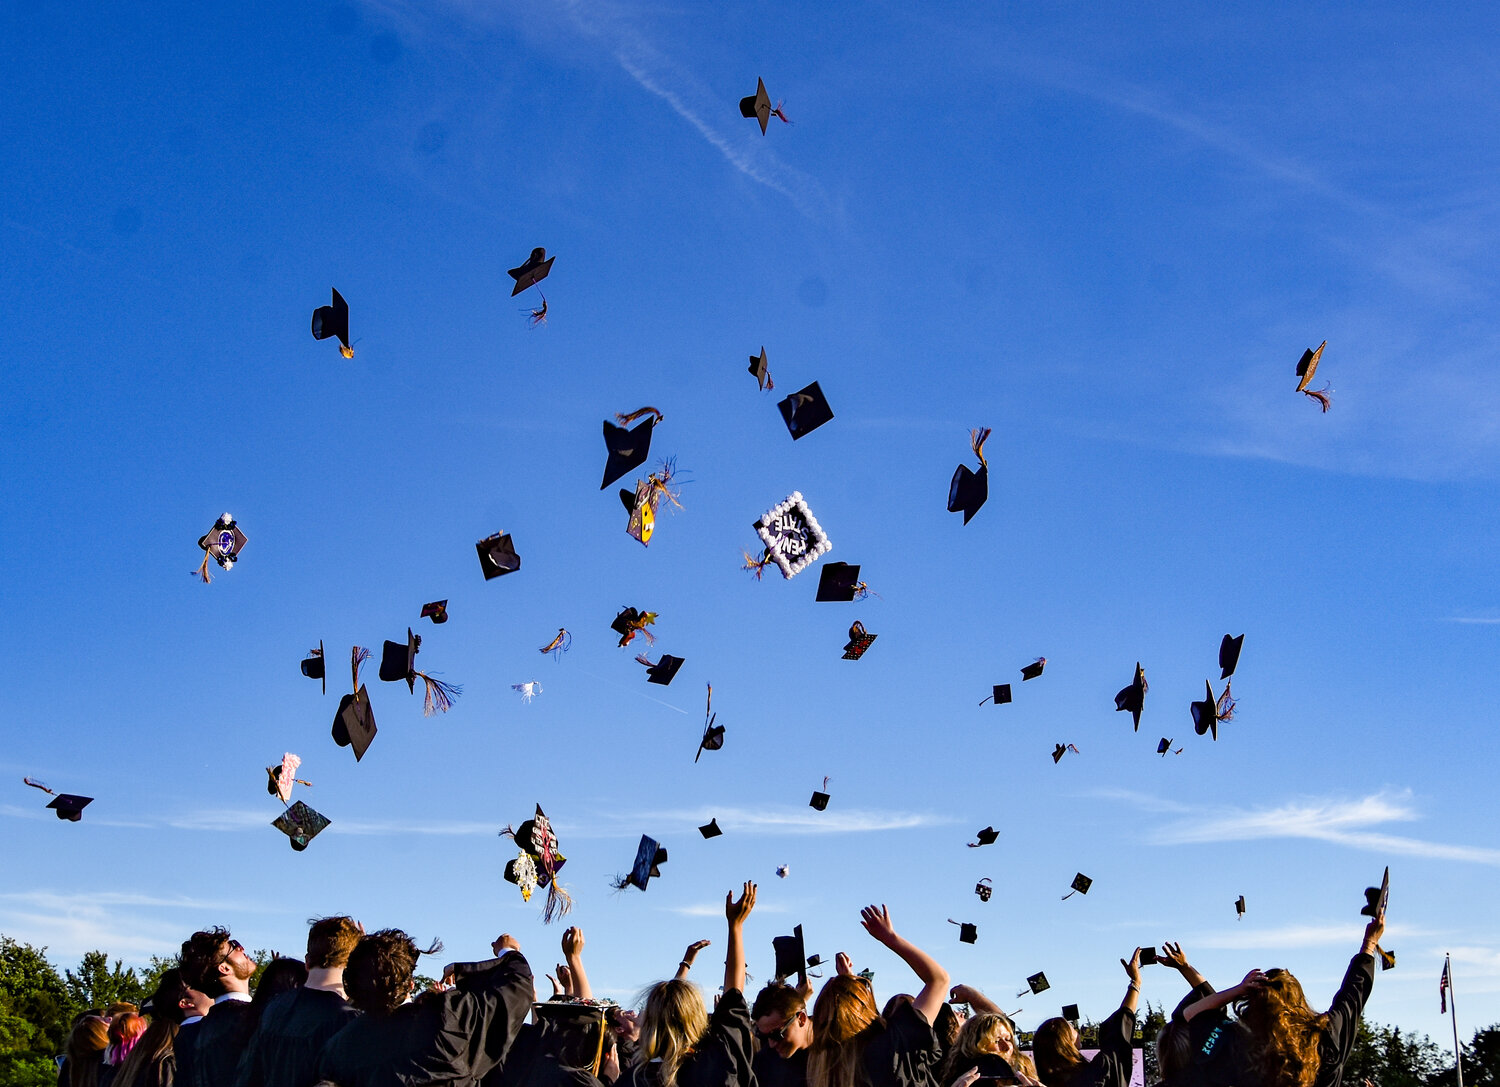 Graduation caps take to the skies over Palisades High School on May 31.